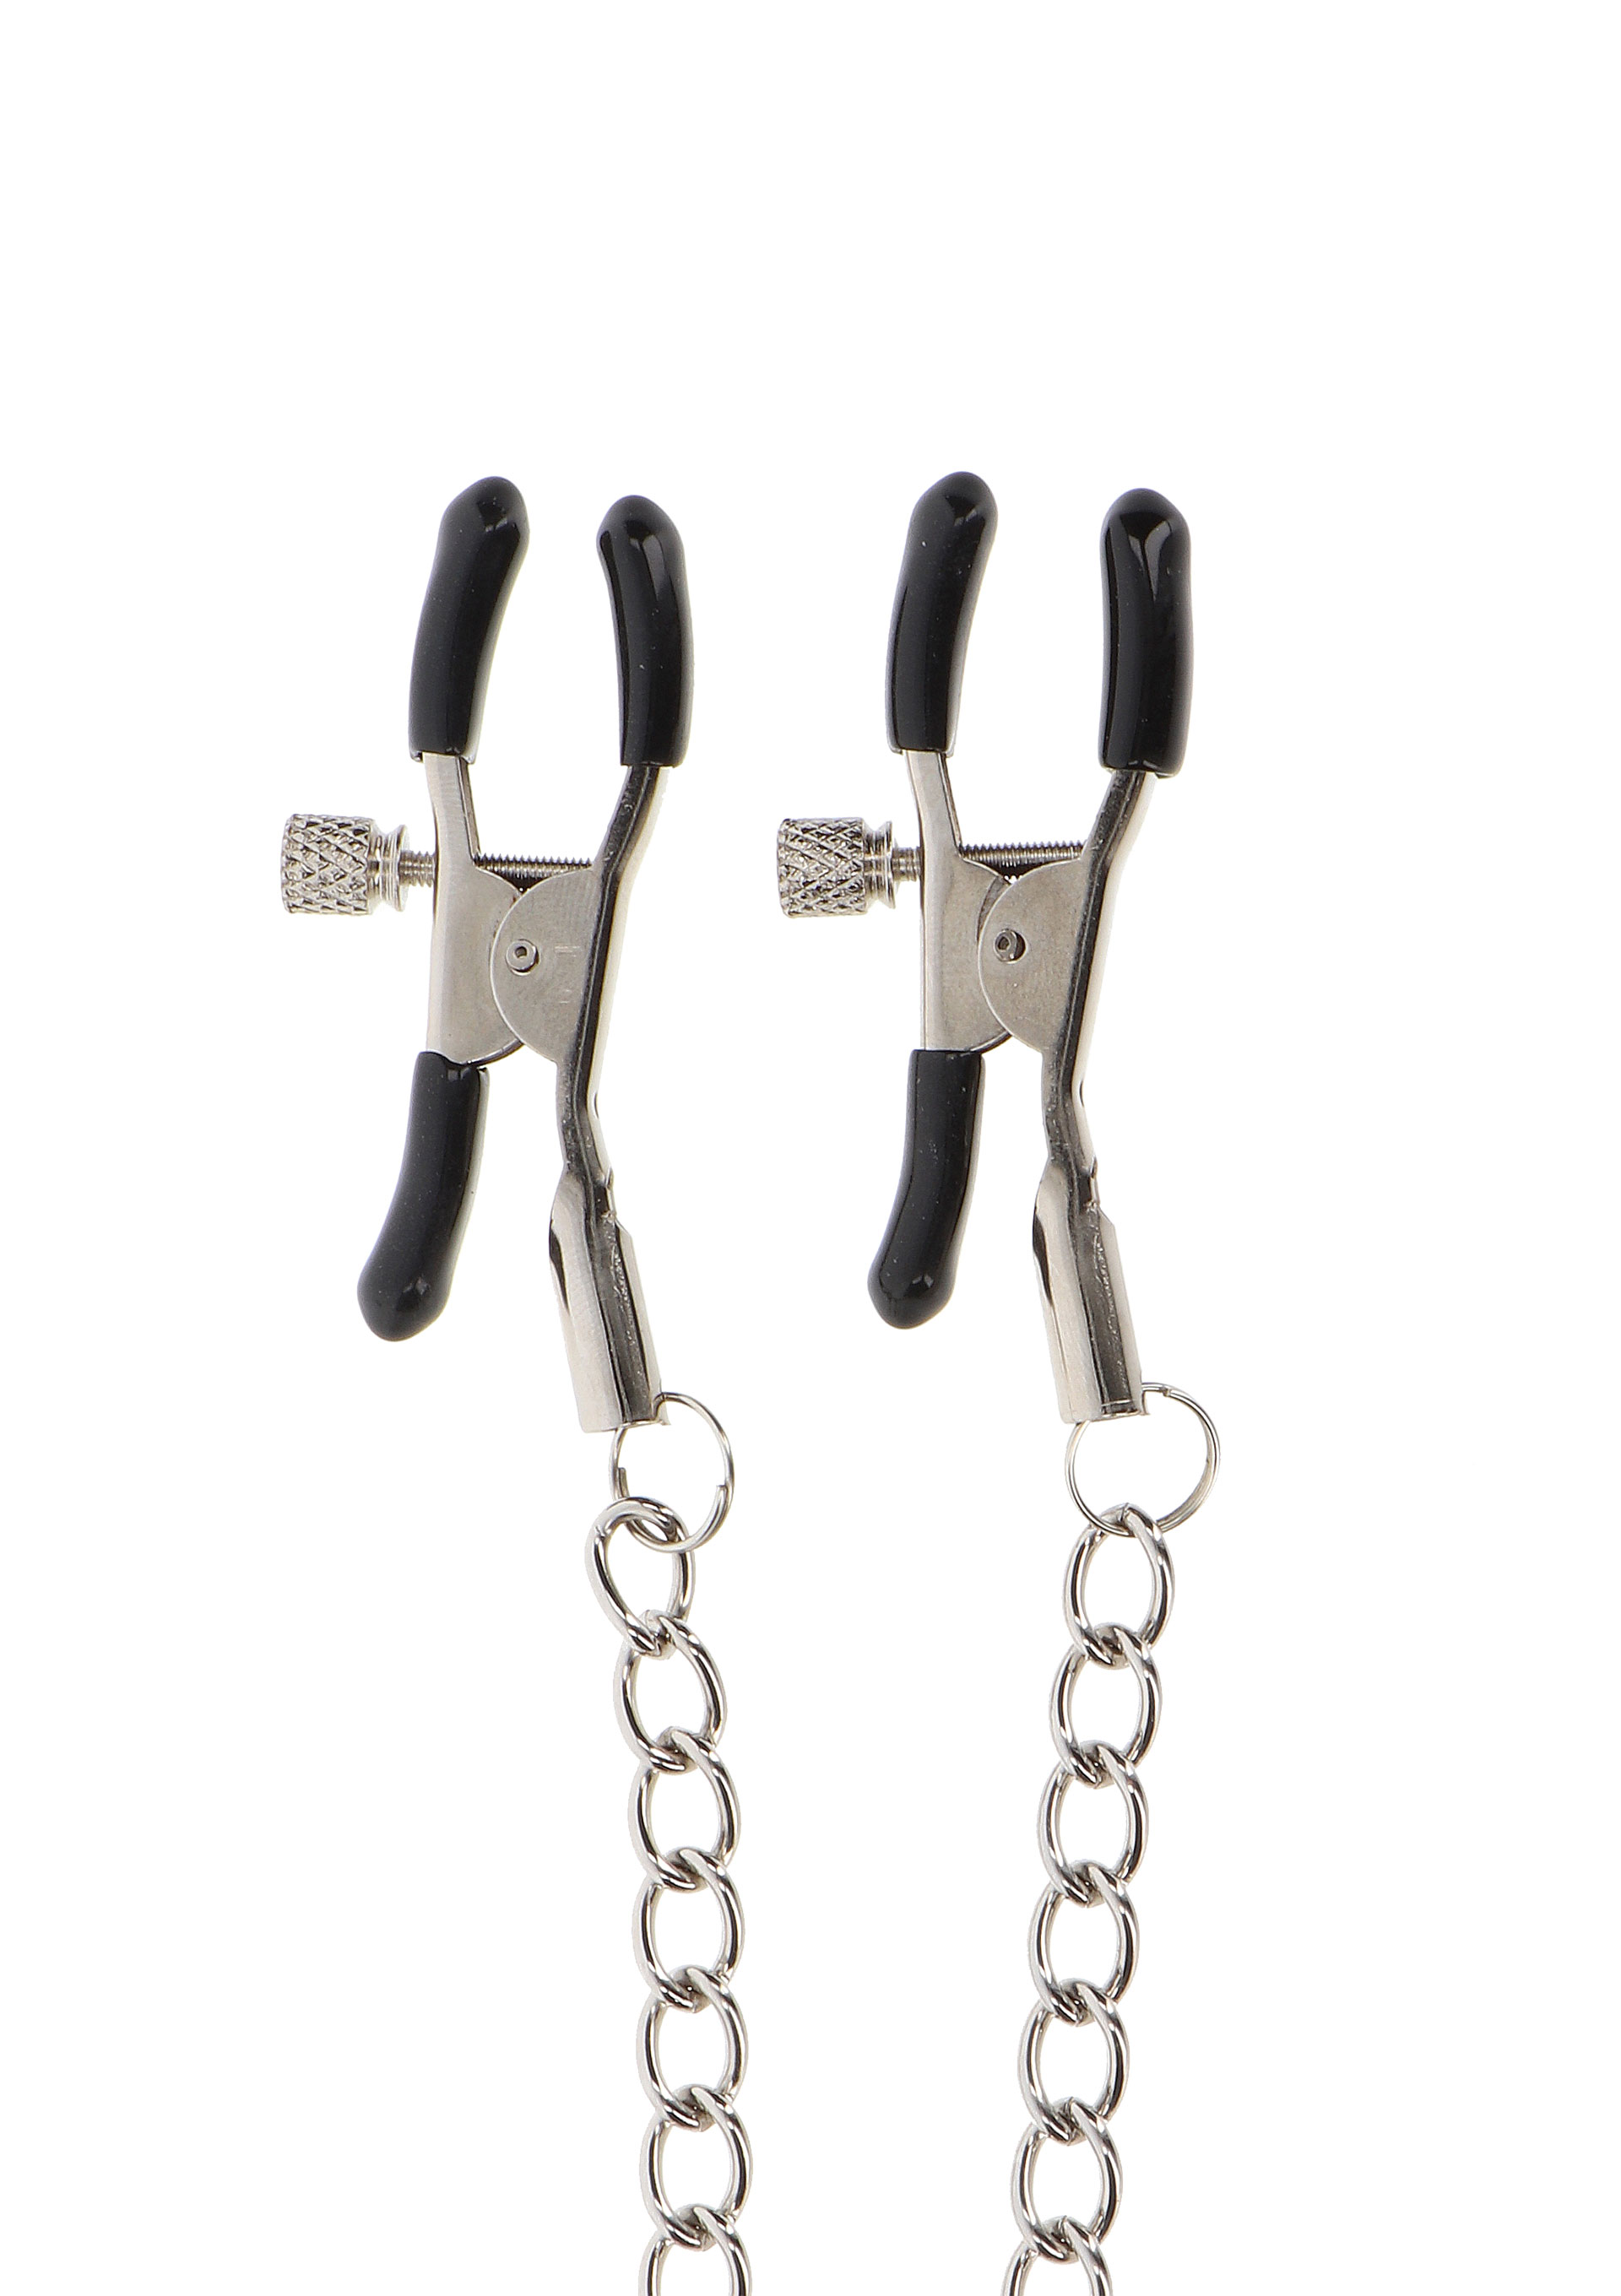 Taboom - Taboom Adjustable Clamps with Chain